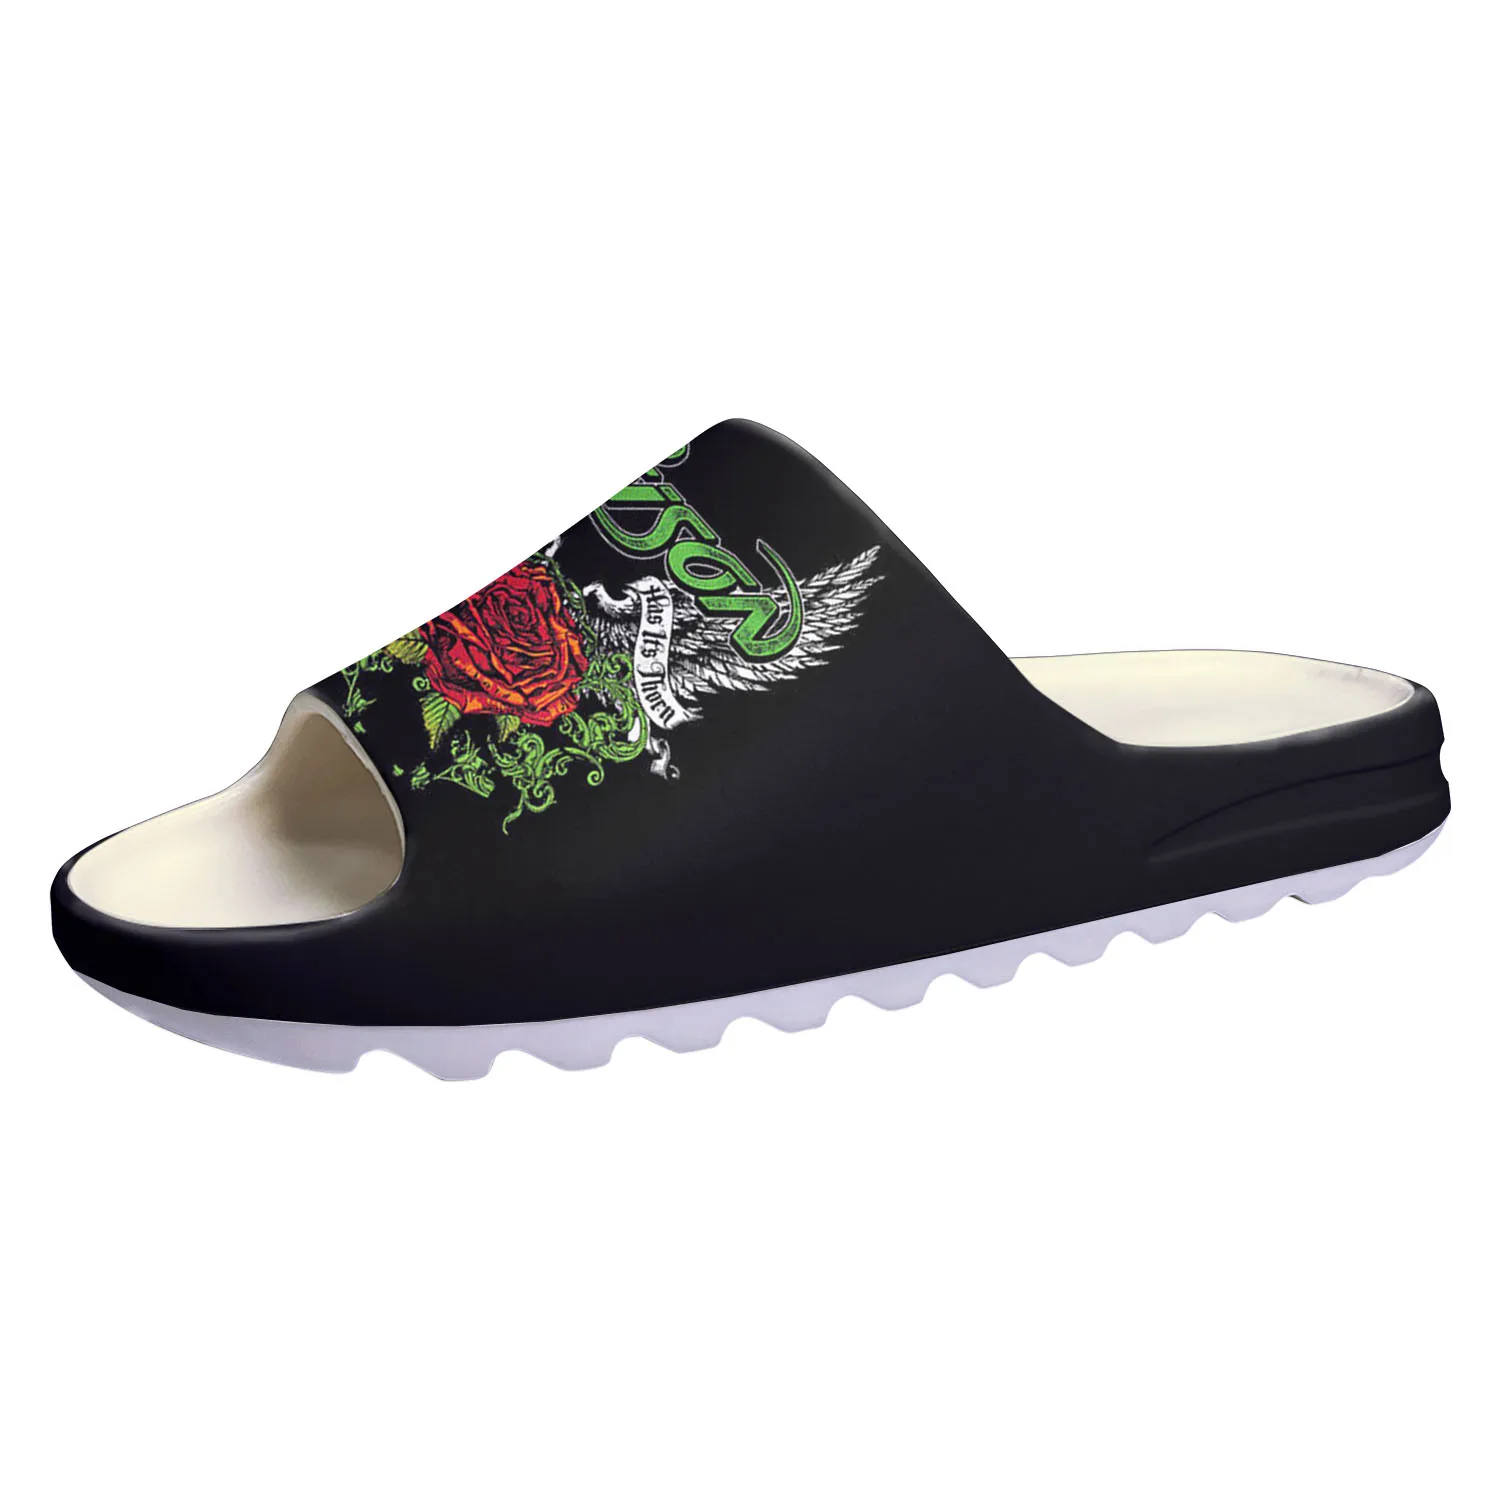 

Poison Band Rock Soft Sole Sllipers Home Clogs Step on Water Shoes Mens Womens Teenager Bathroom Customize on Shit Sandals